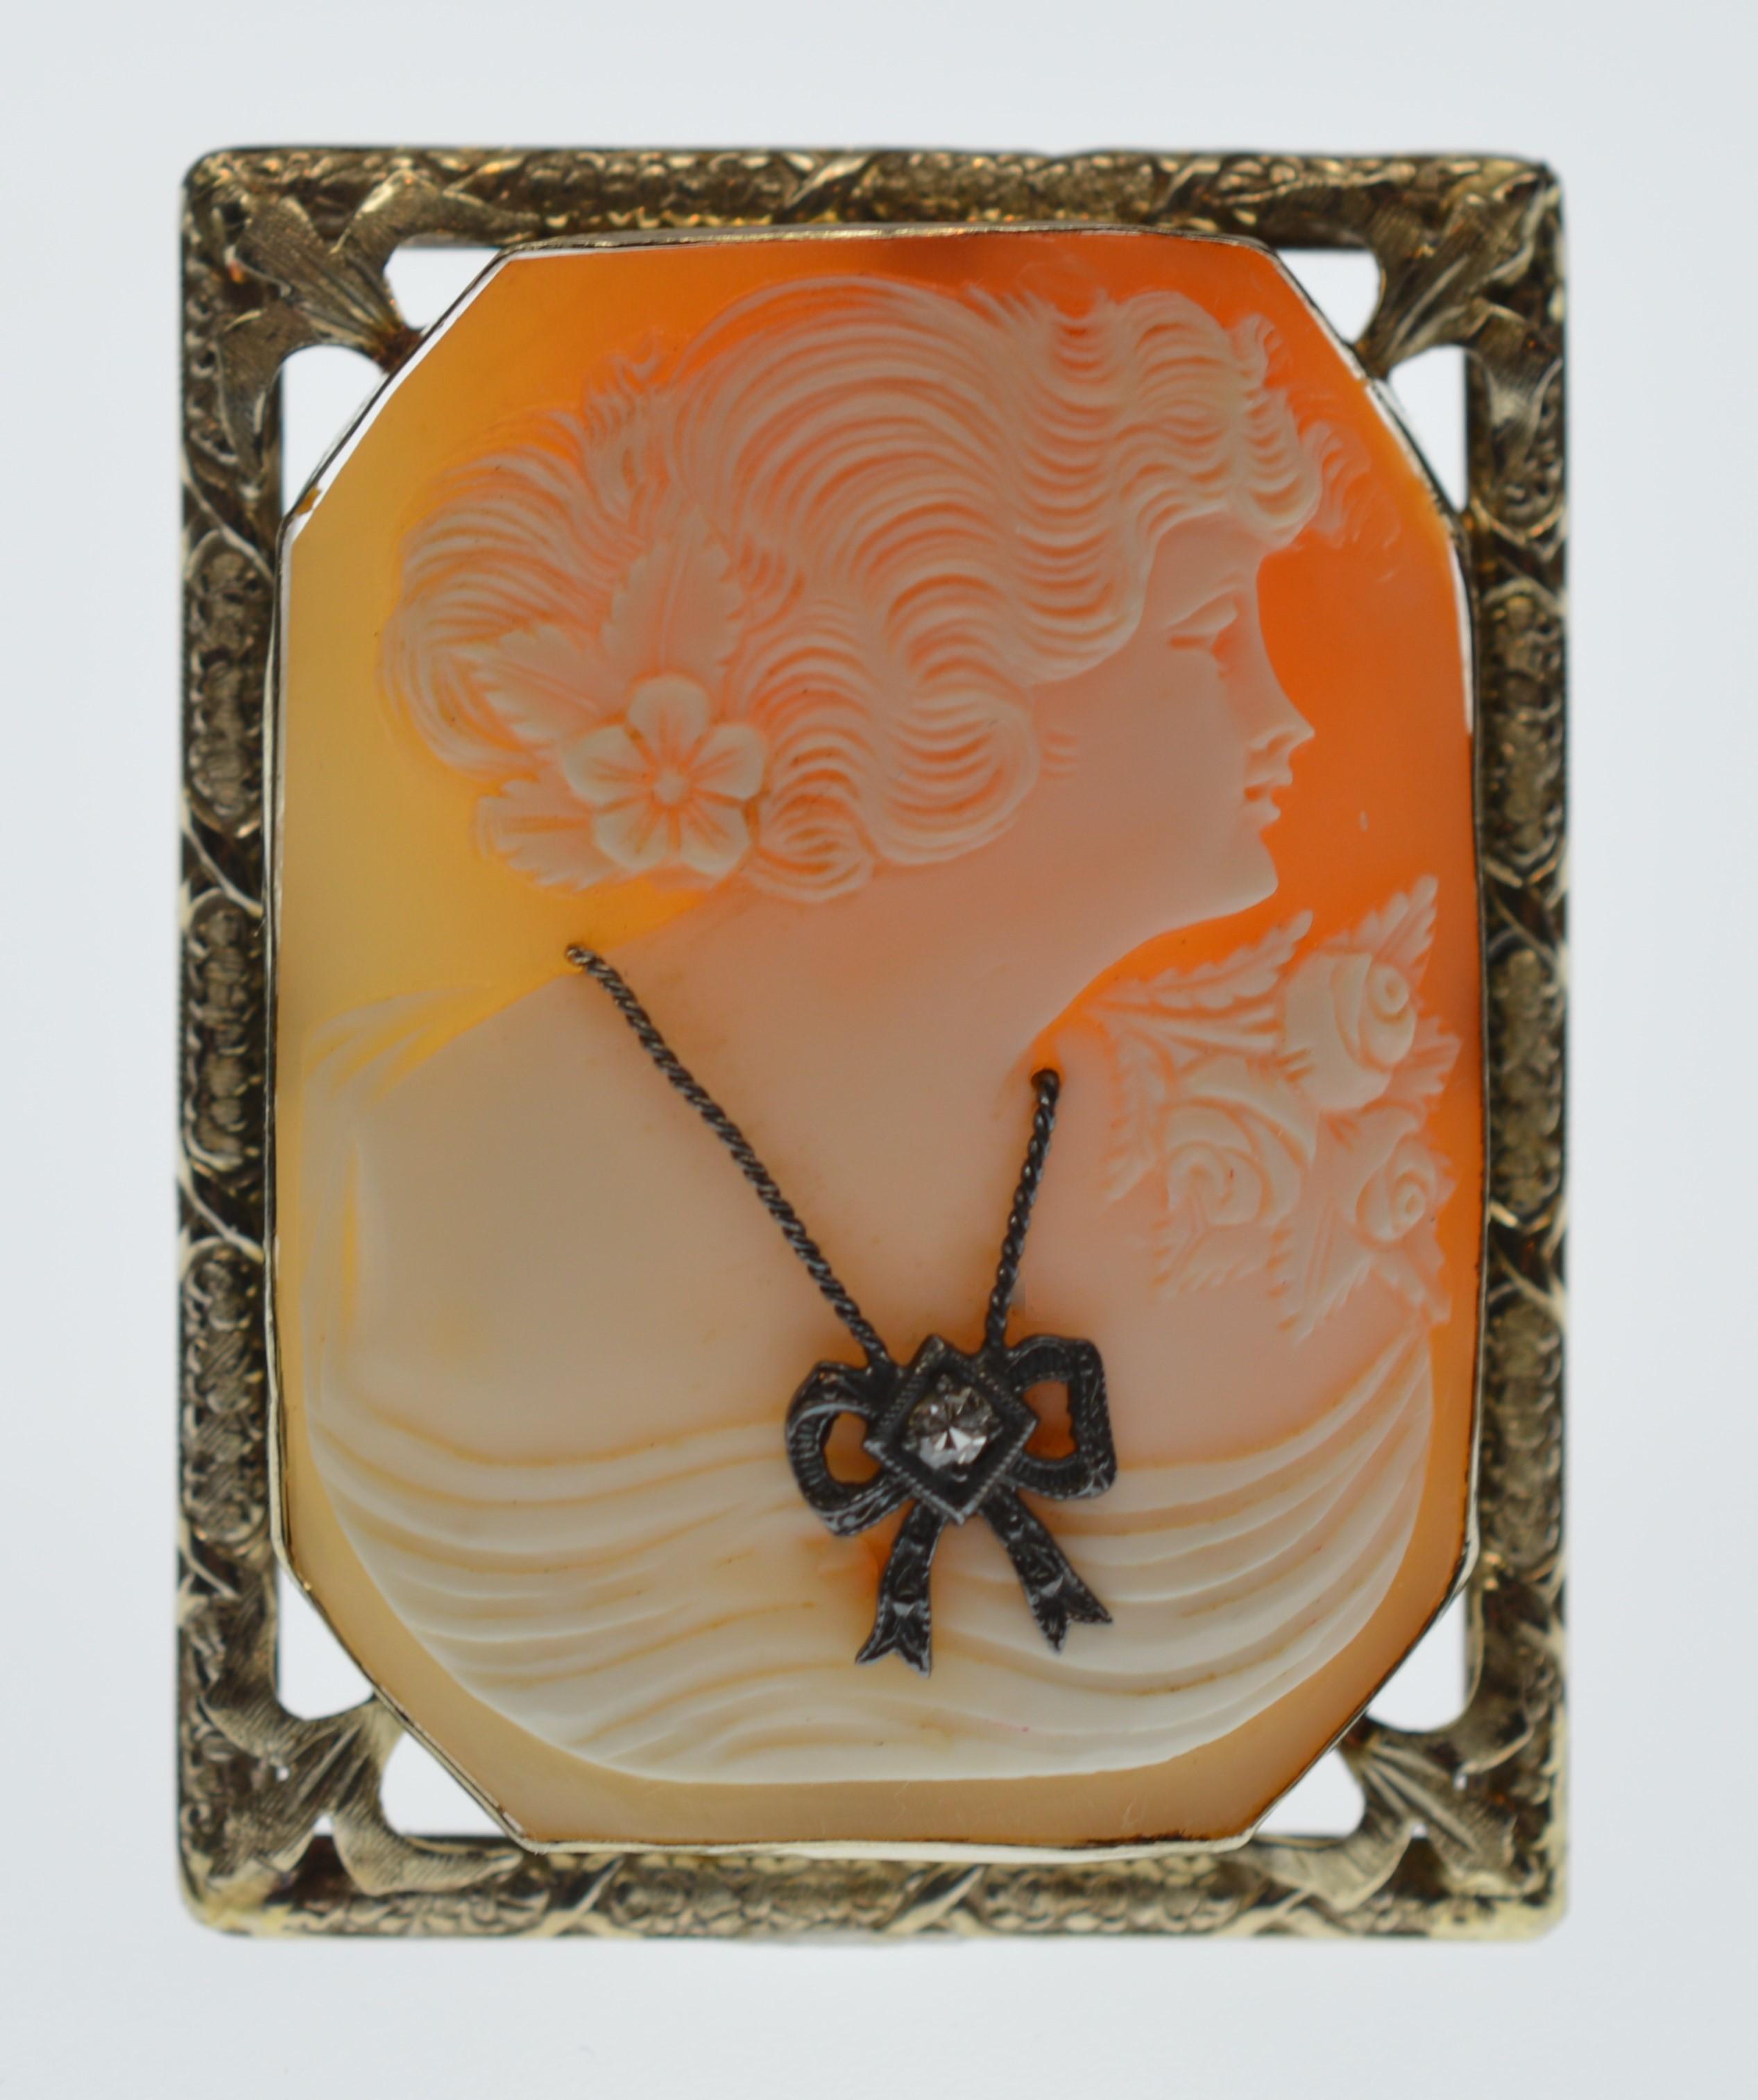 Unusually fine style hand carved Cameo Brooch Pin Pendant mounted in a 14 Karat Rose Gold frame. Created from a tropical mollusk by a European craftsman, this expertly carved raised relief image depicts the profile of a beautifully lady wearing a